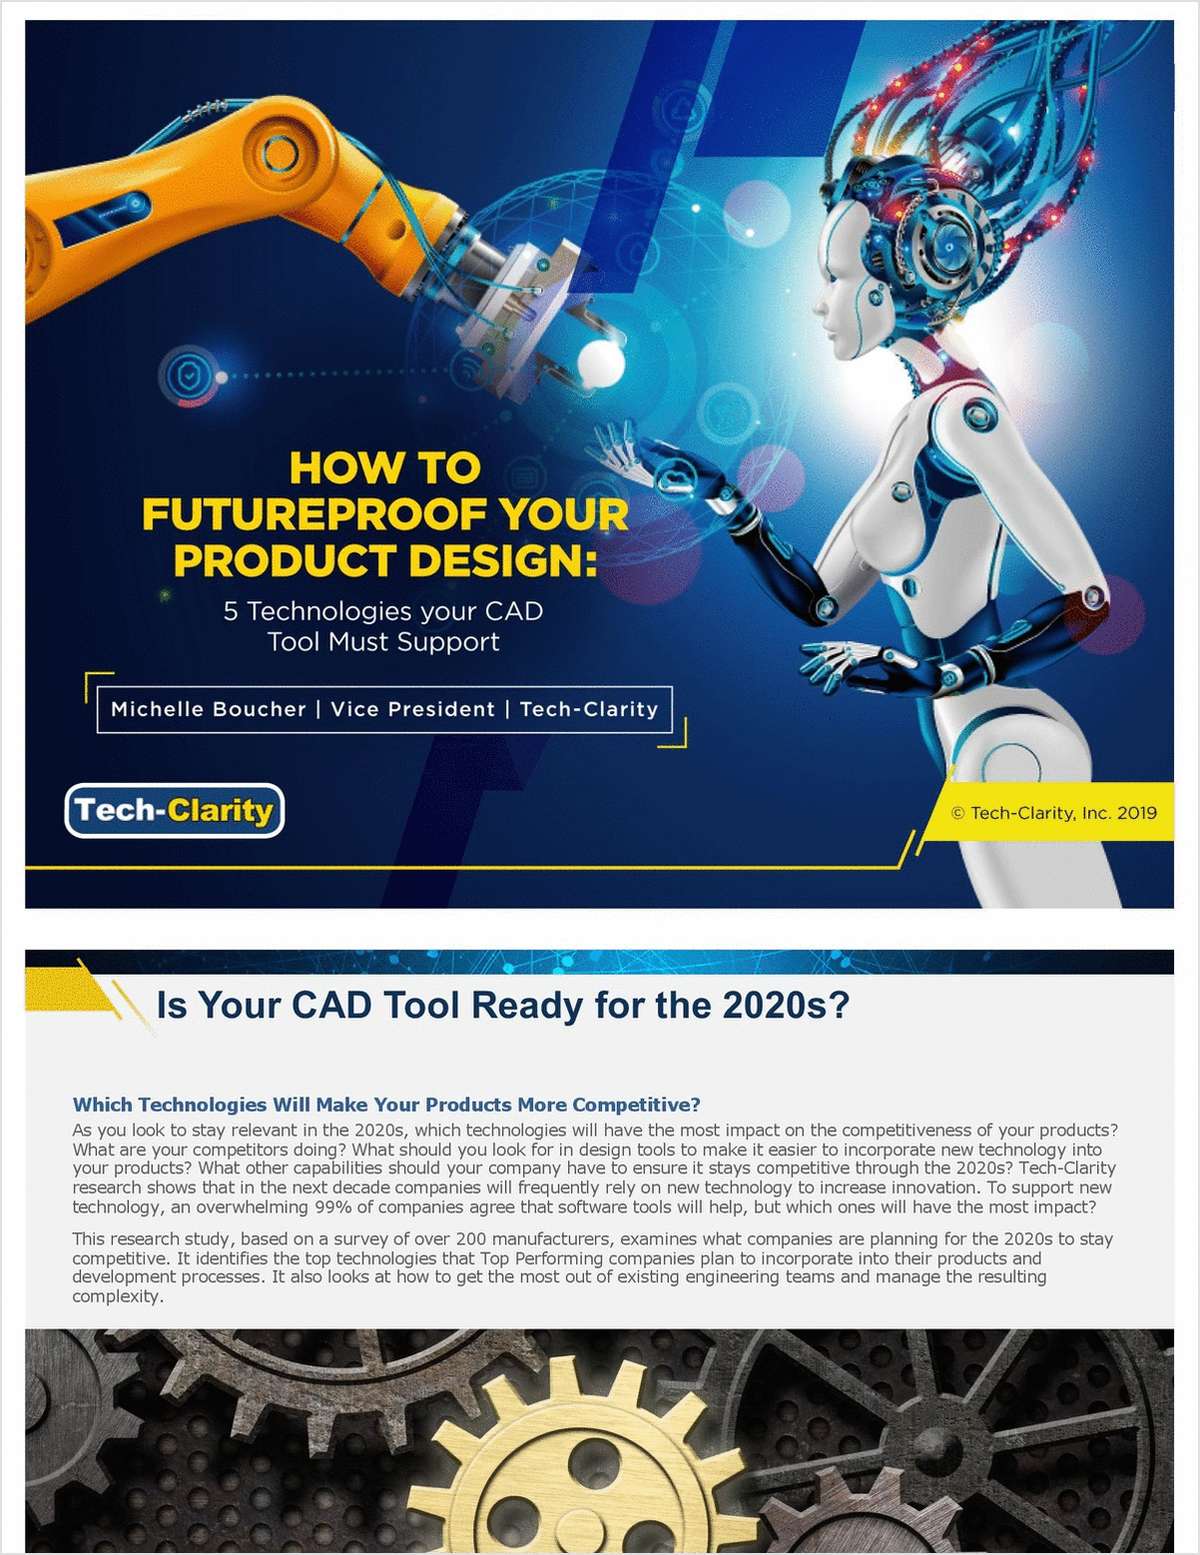 How to Futureproof Your Product Design: 5 Technologies your CAD Tool Must Support